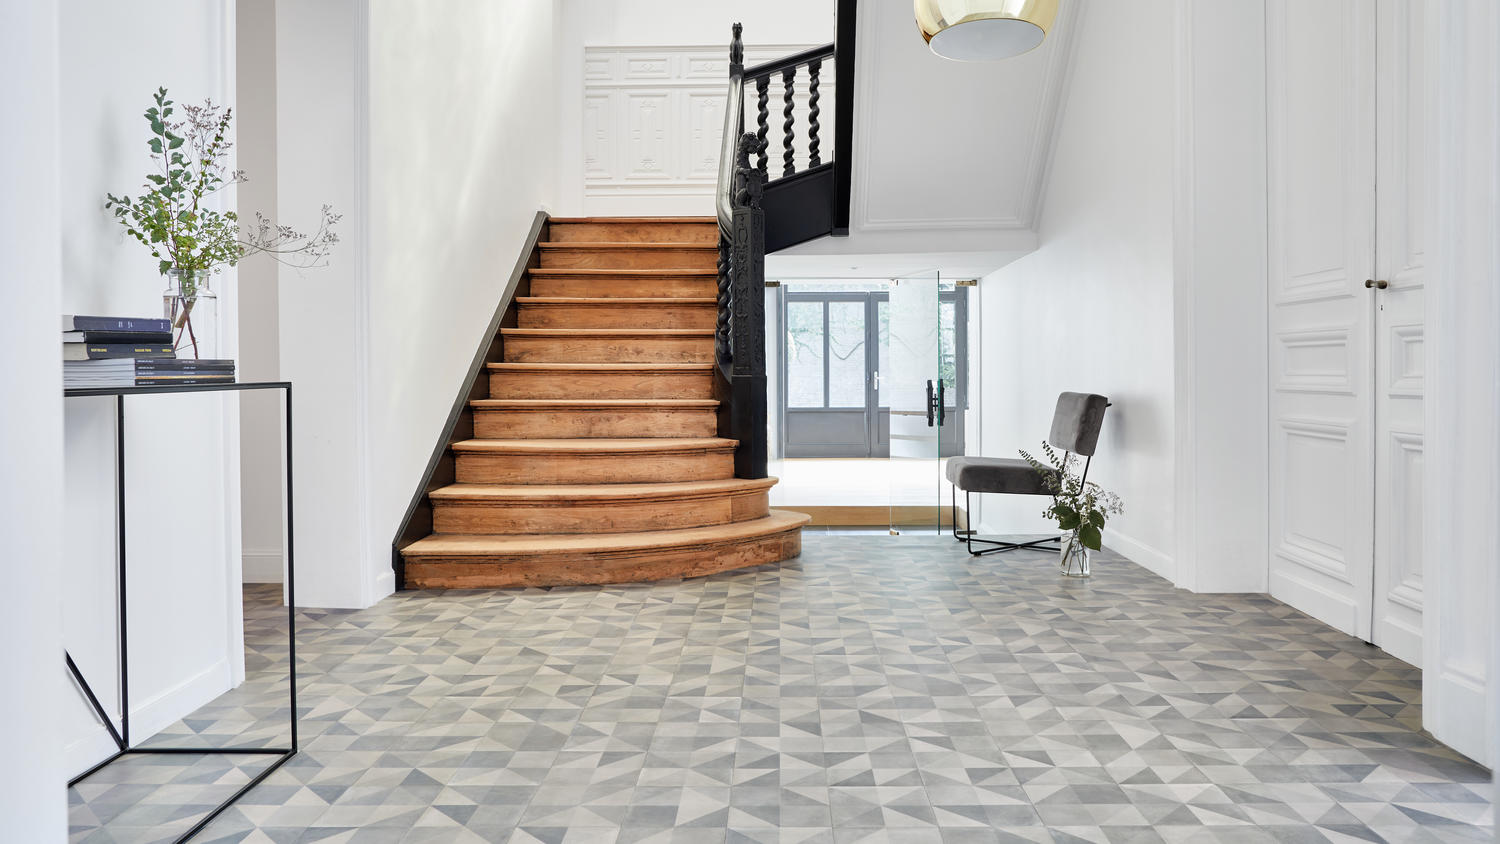 What Is The Best Flooring For An, What S The Best Flooring For Hallways